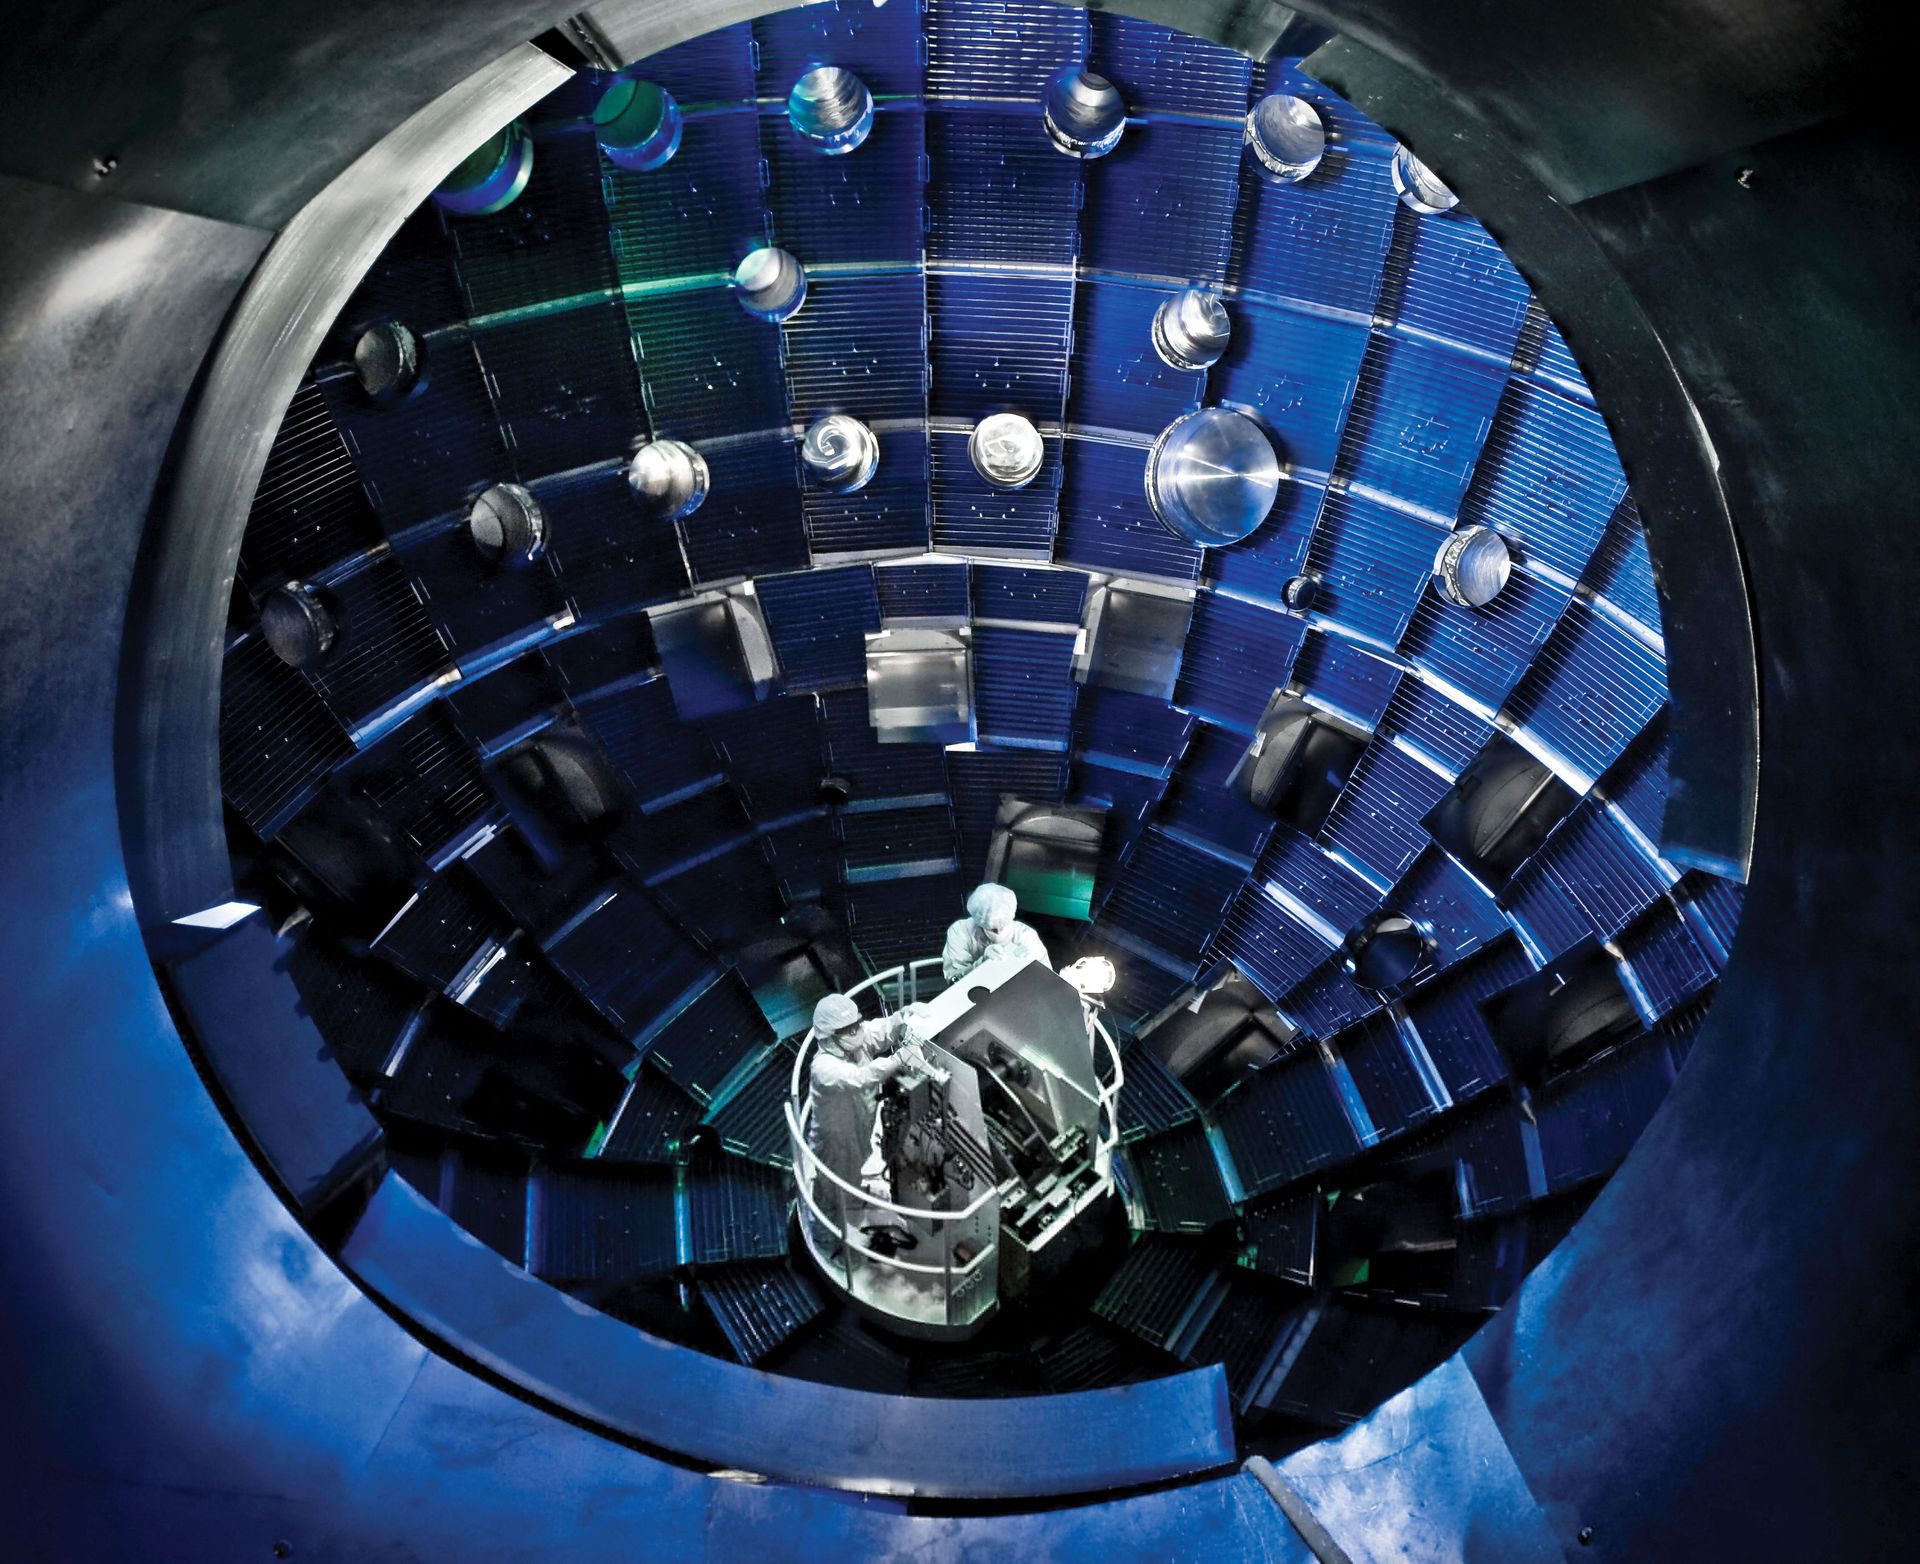 Scientists in white coats operate a device inside of a globular chamber.